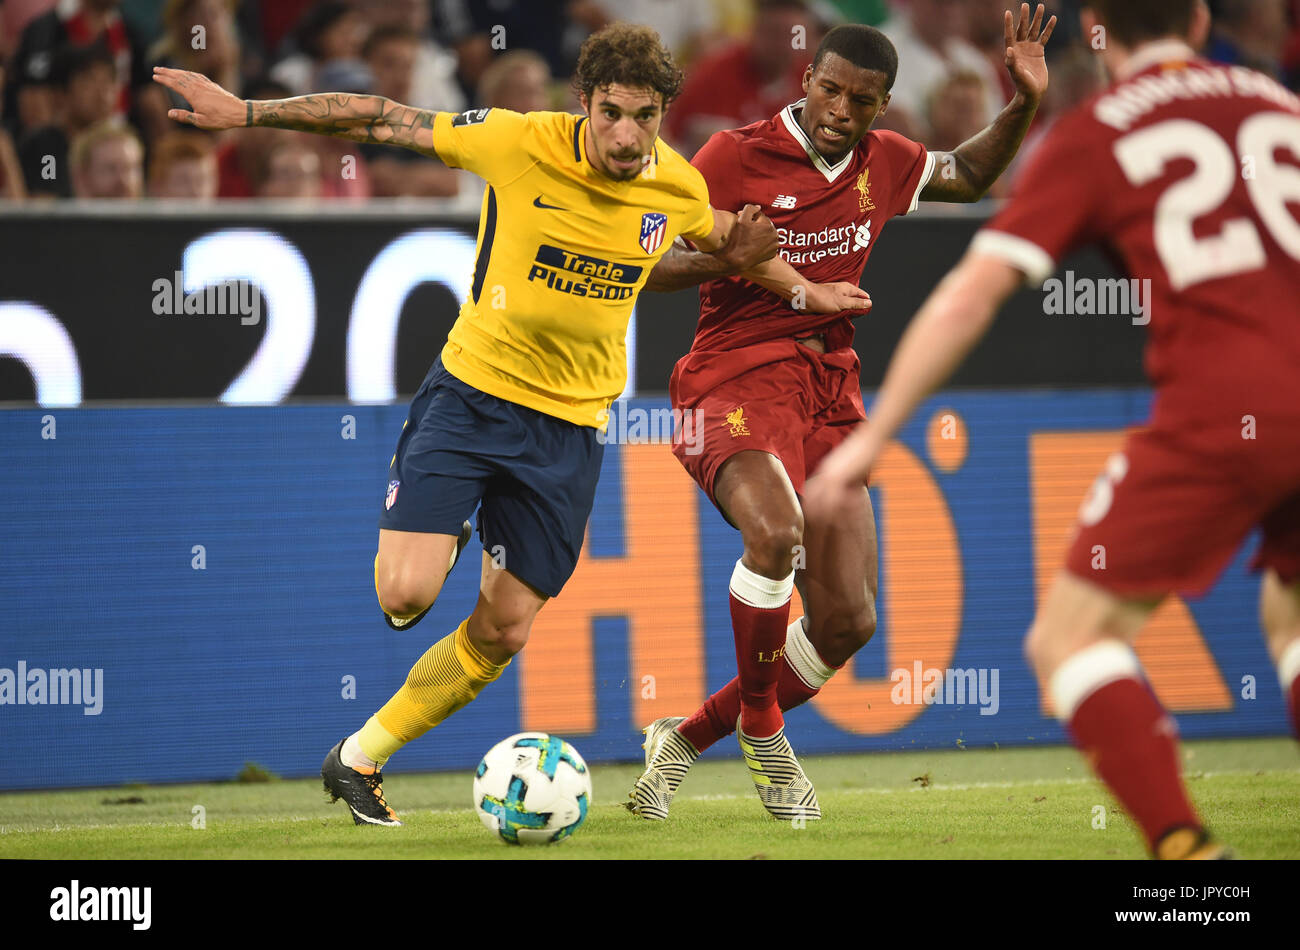 Munich, Germany. 2nd Aug, 2017. Liverpool's Joel Matip (C) and Madrid's Vrsaljko vie for the ball during the Audi Cup final soccer match between Atletico Madrid and FC Liverpool in the Allianz Arena in Munich, Germany, 2 August 2017. Photo: Andreas Gebert/dpa/Alamy Live News Stock Photo